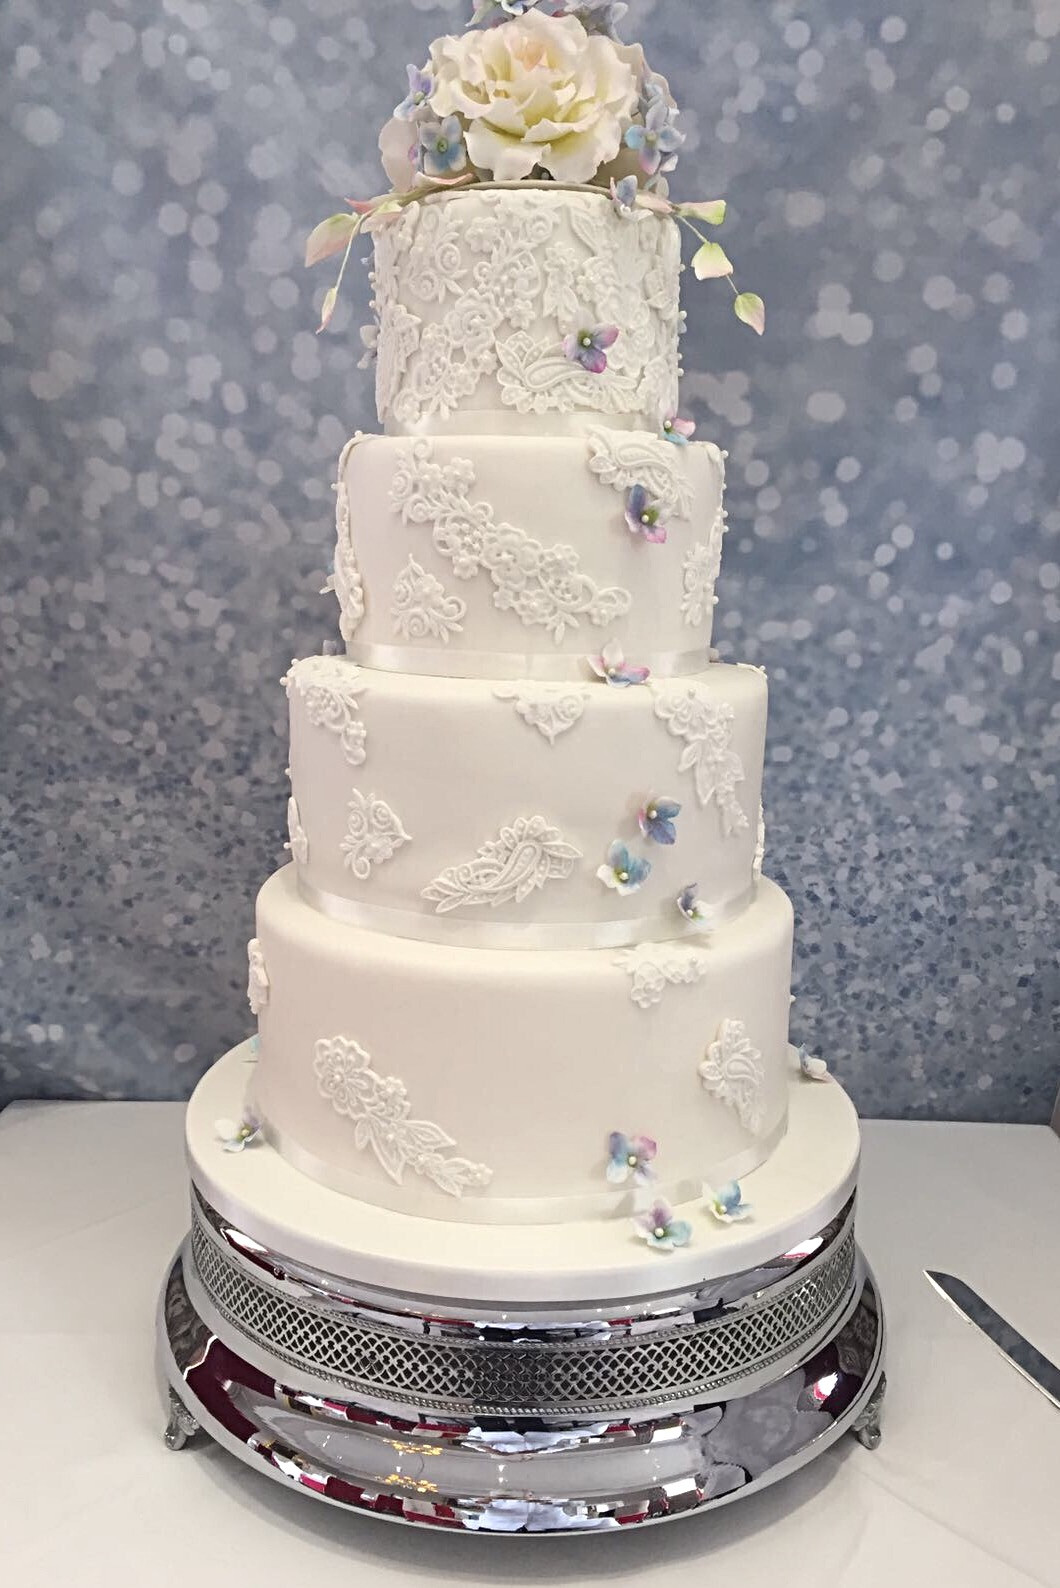 Wedding Cakes Uk
 Our Wedding Cakes in Meopham Gravesend Kent